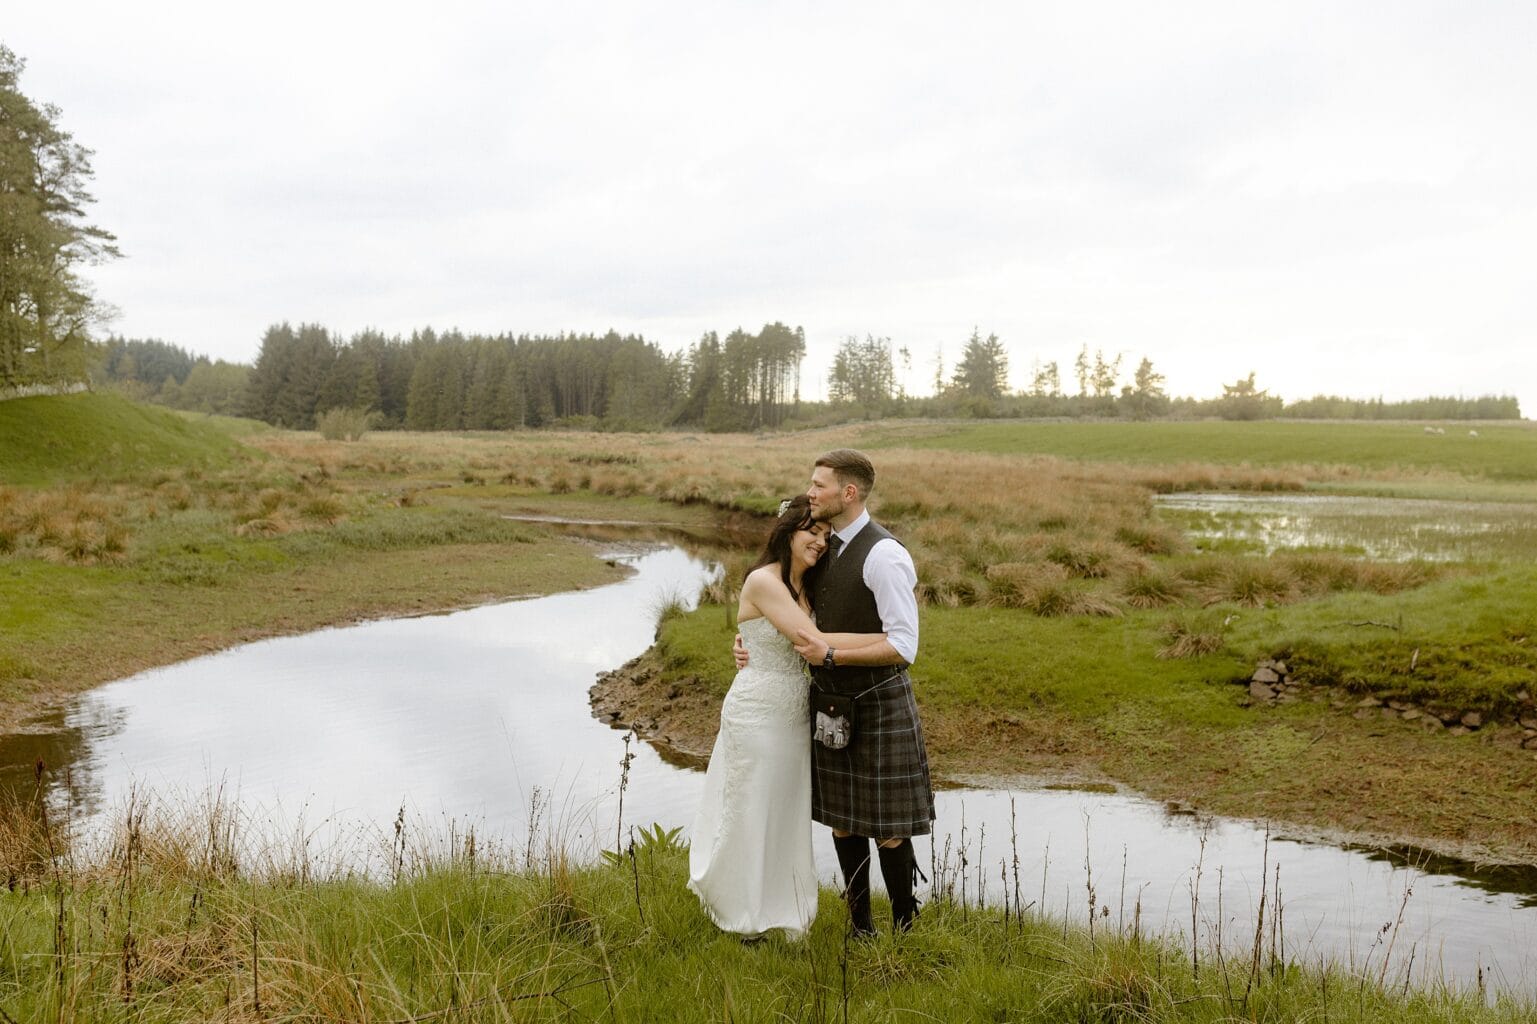 the bride and groom stand in front of a river with their arms around each other with grass and trees visible in the background